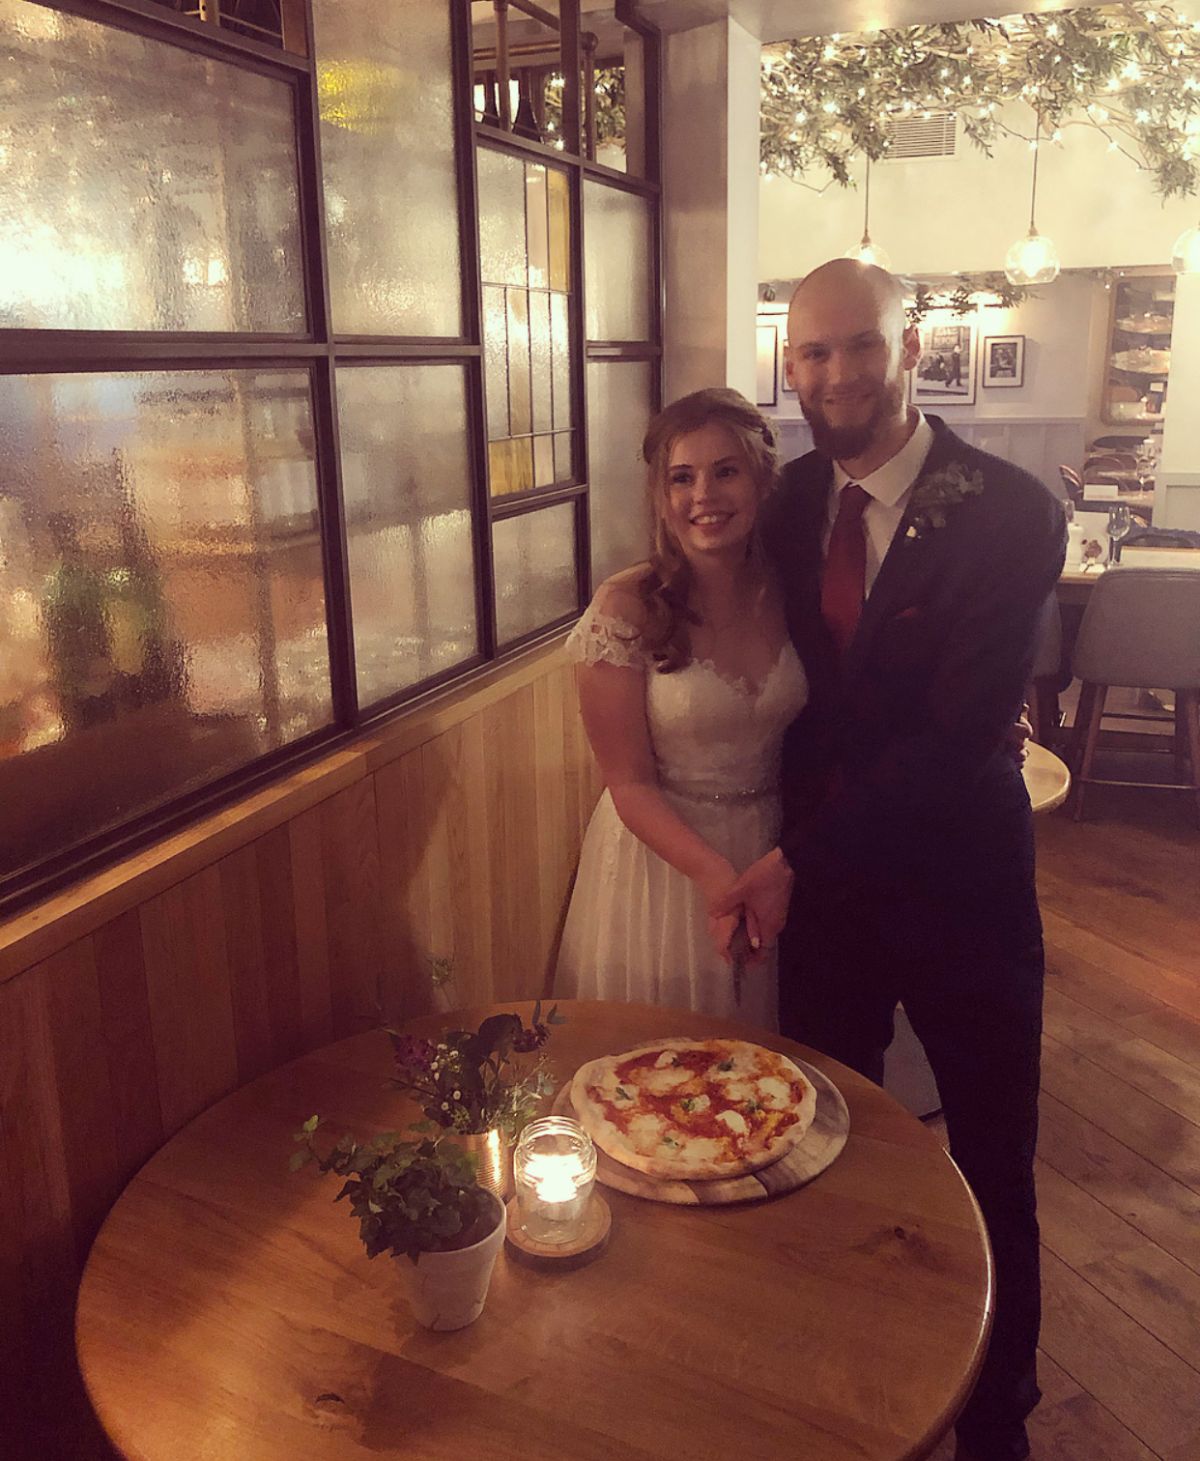 Cutting the Pizza, a quirky Idea from our bride and groom.